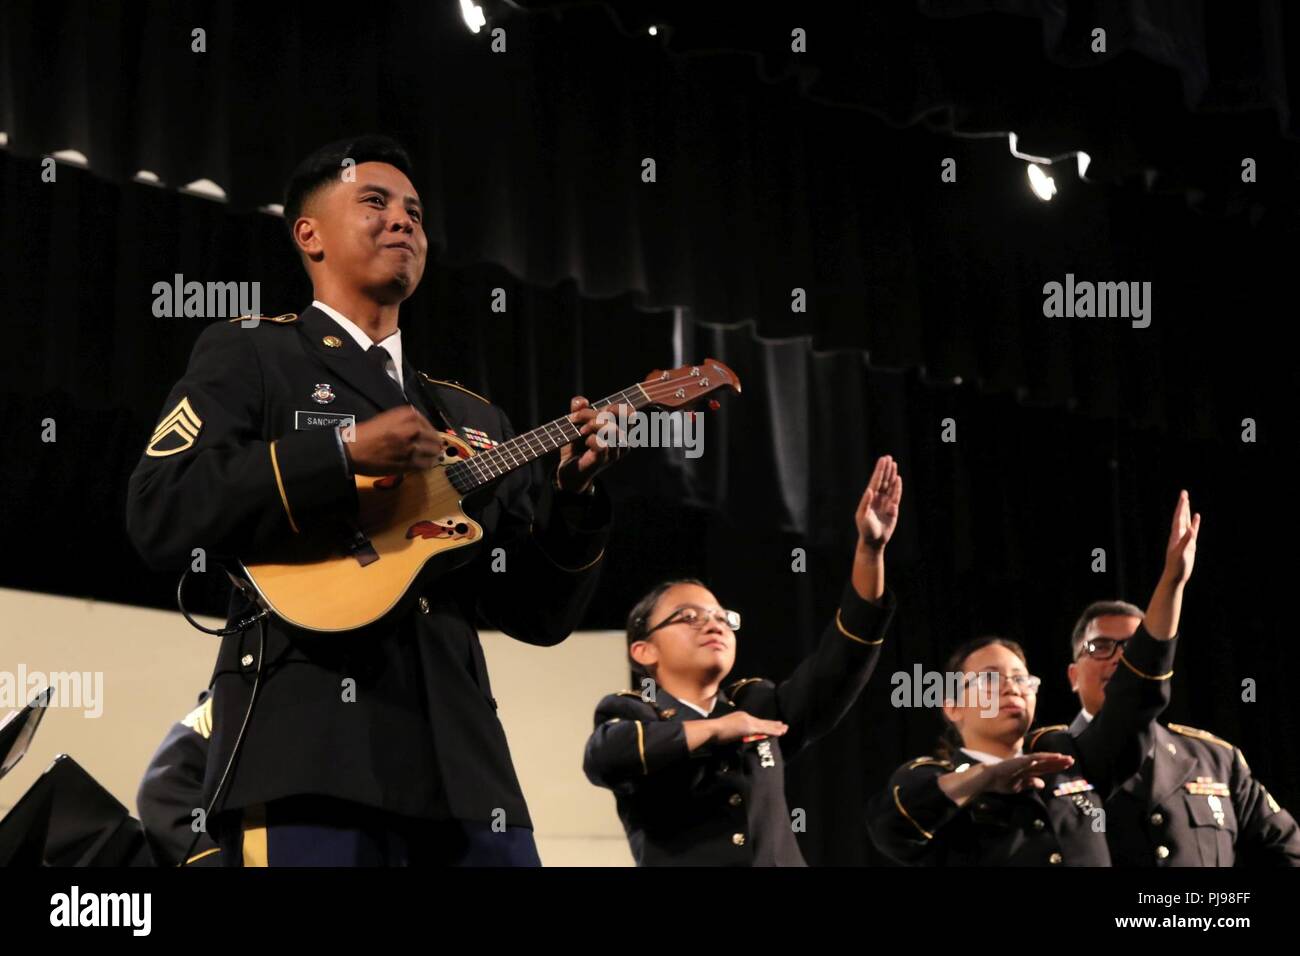 Staff Sgt. Bryan Sanchez performs a ukulele solo during the joint concert of the 111th Army Band and the 234th Army Band at Astoria High School in Astoria, Oregon, July 7, 2018. The concert is the second collaboration between the 111th Army Band and the 234th Army Band with efforts to display the results of their training in a live setting. Stock Photo